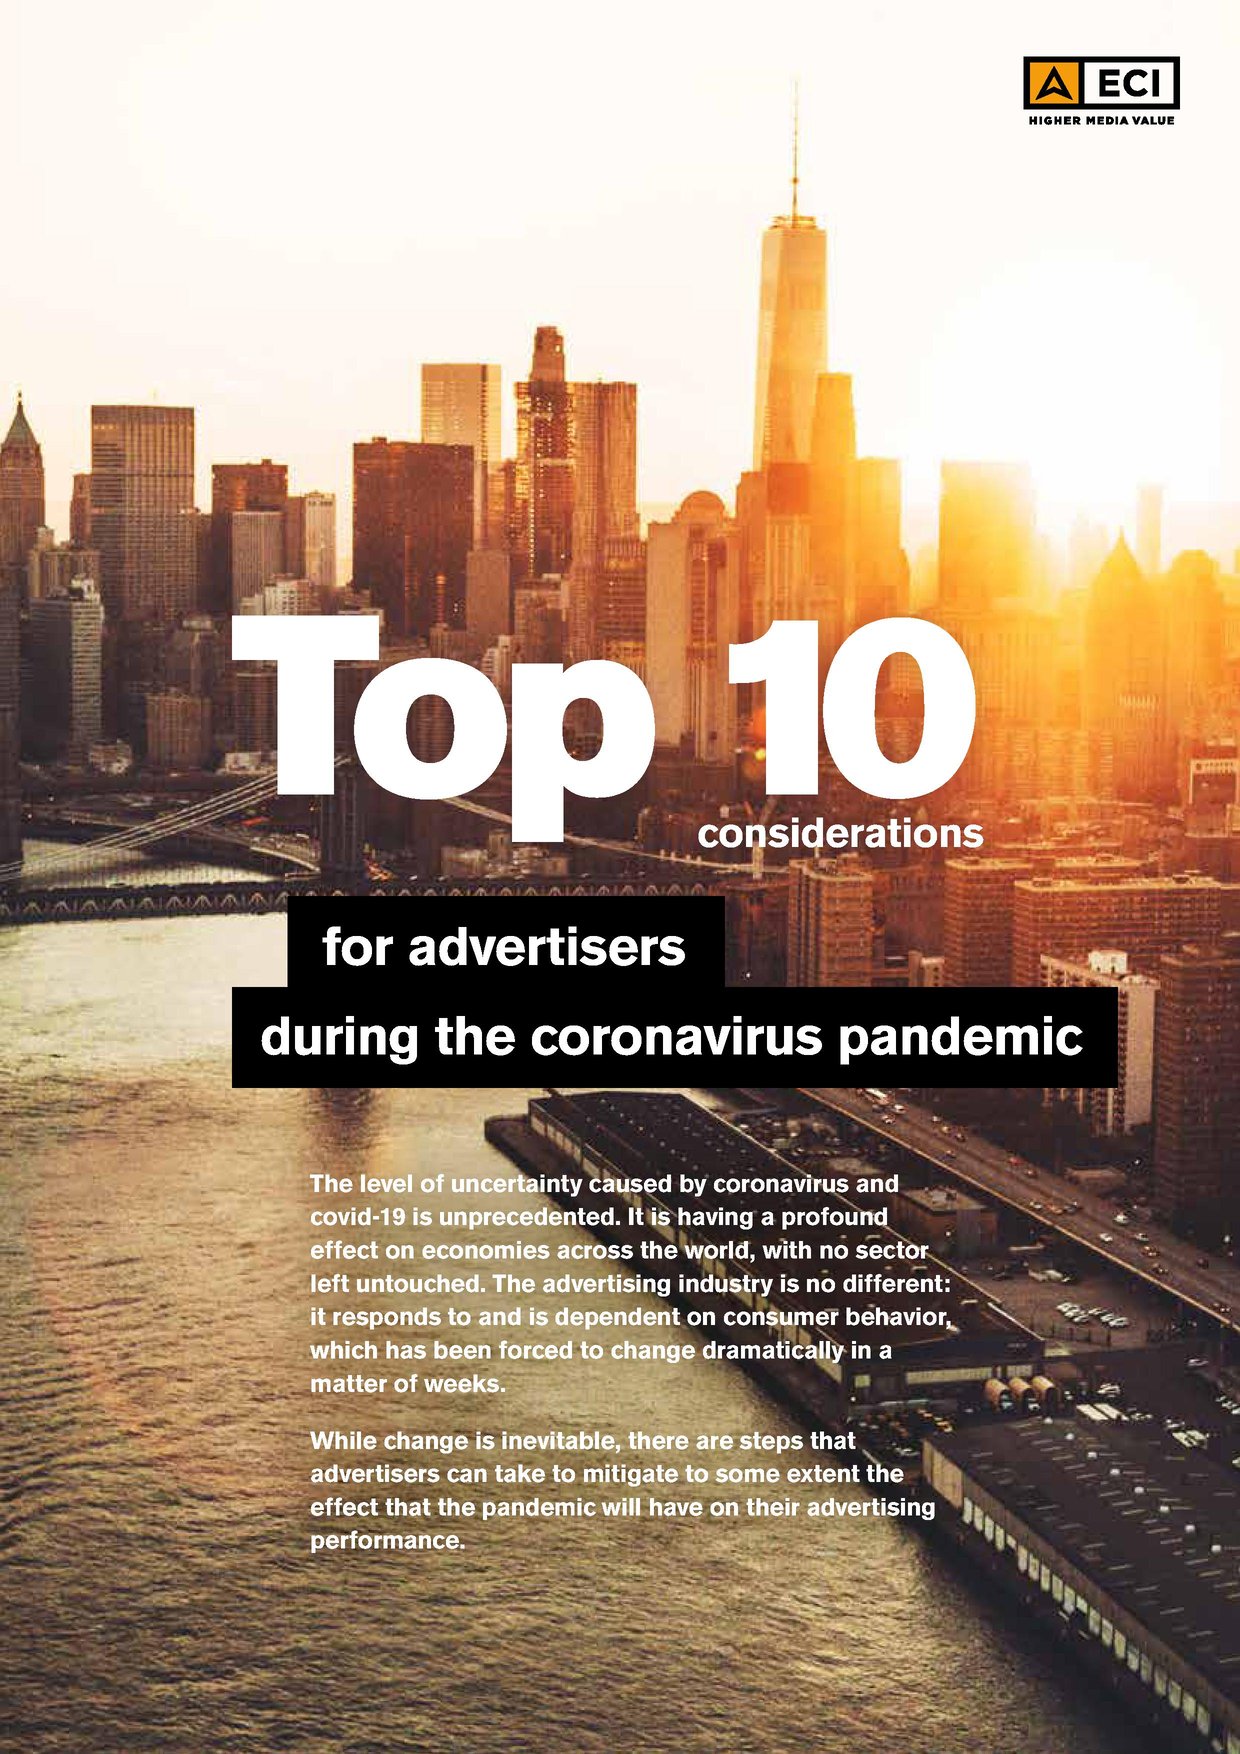 ECI_Top_10_considerations_for_advertisers_during_the_coronavirus_pandemic001